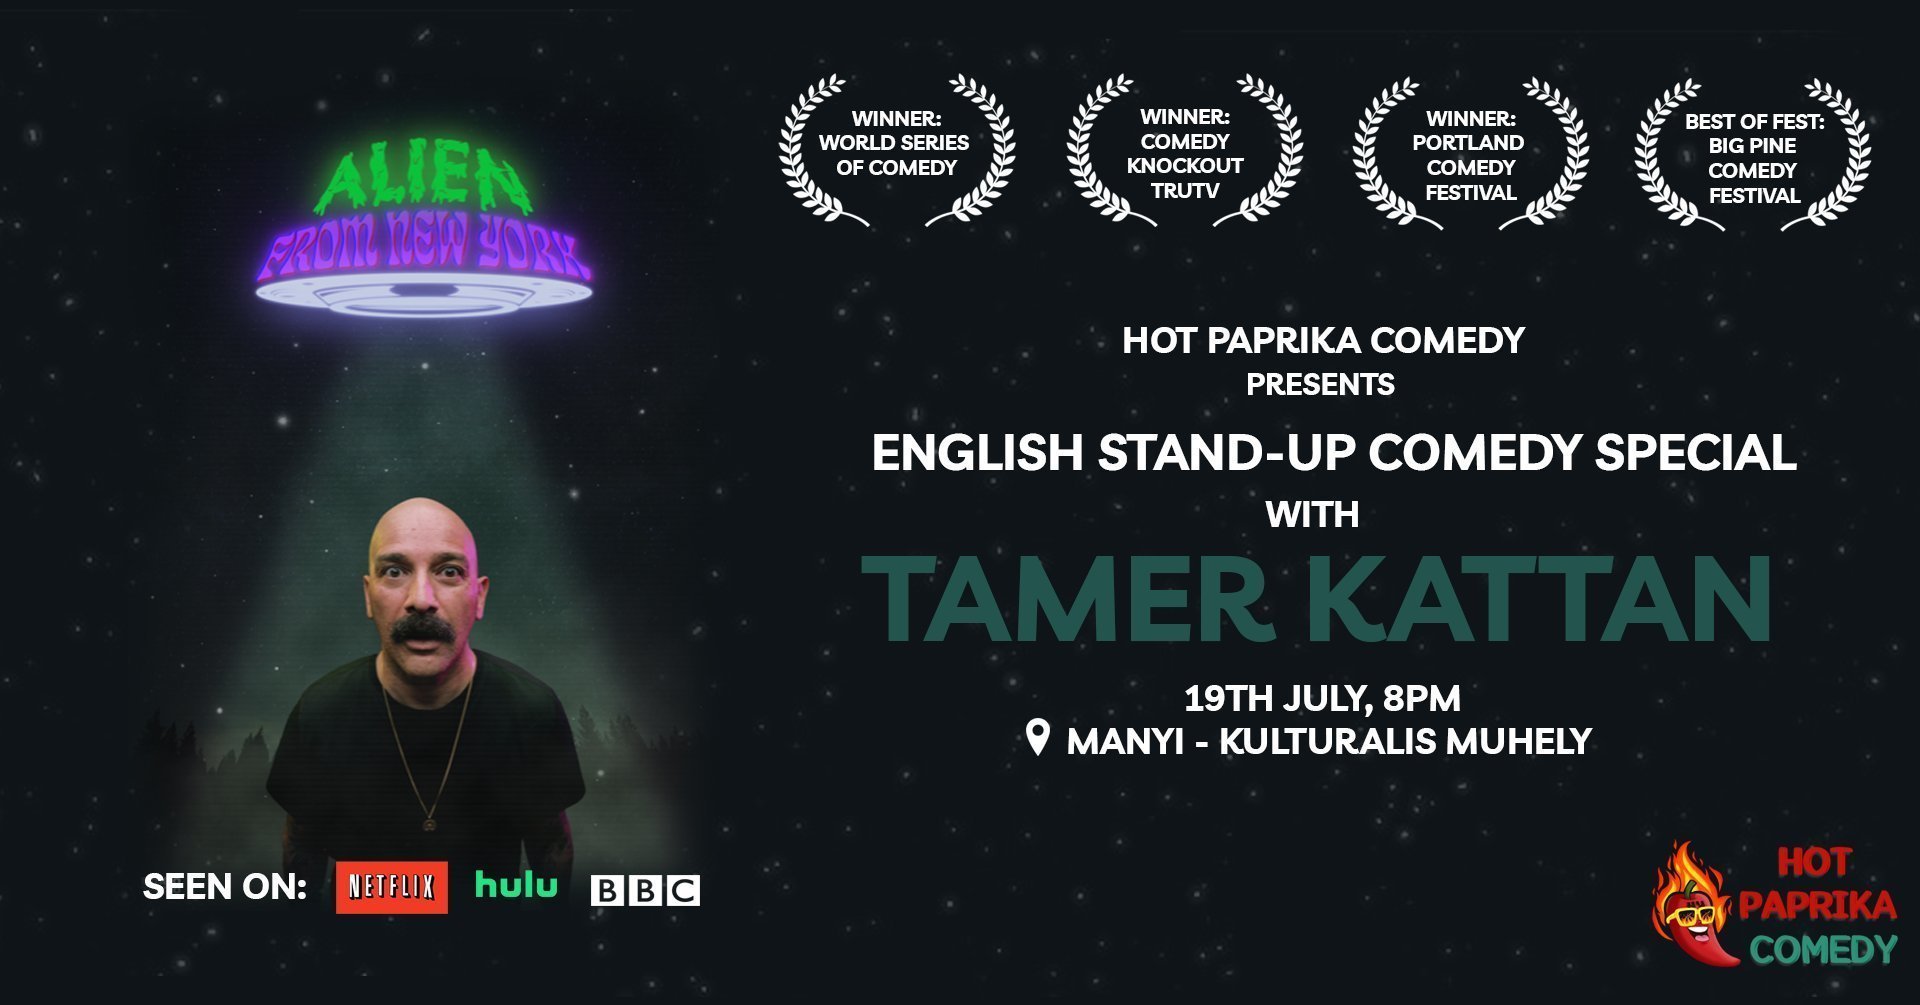 English Stand-Up Comedy Special with Tamer Kattan